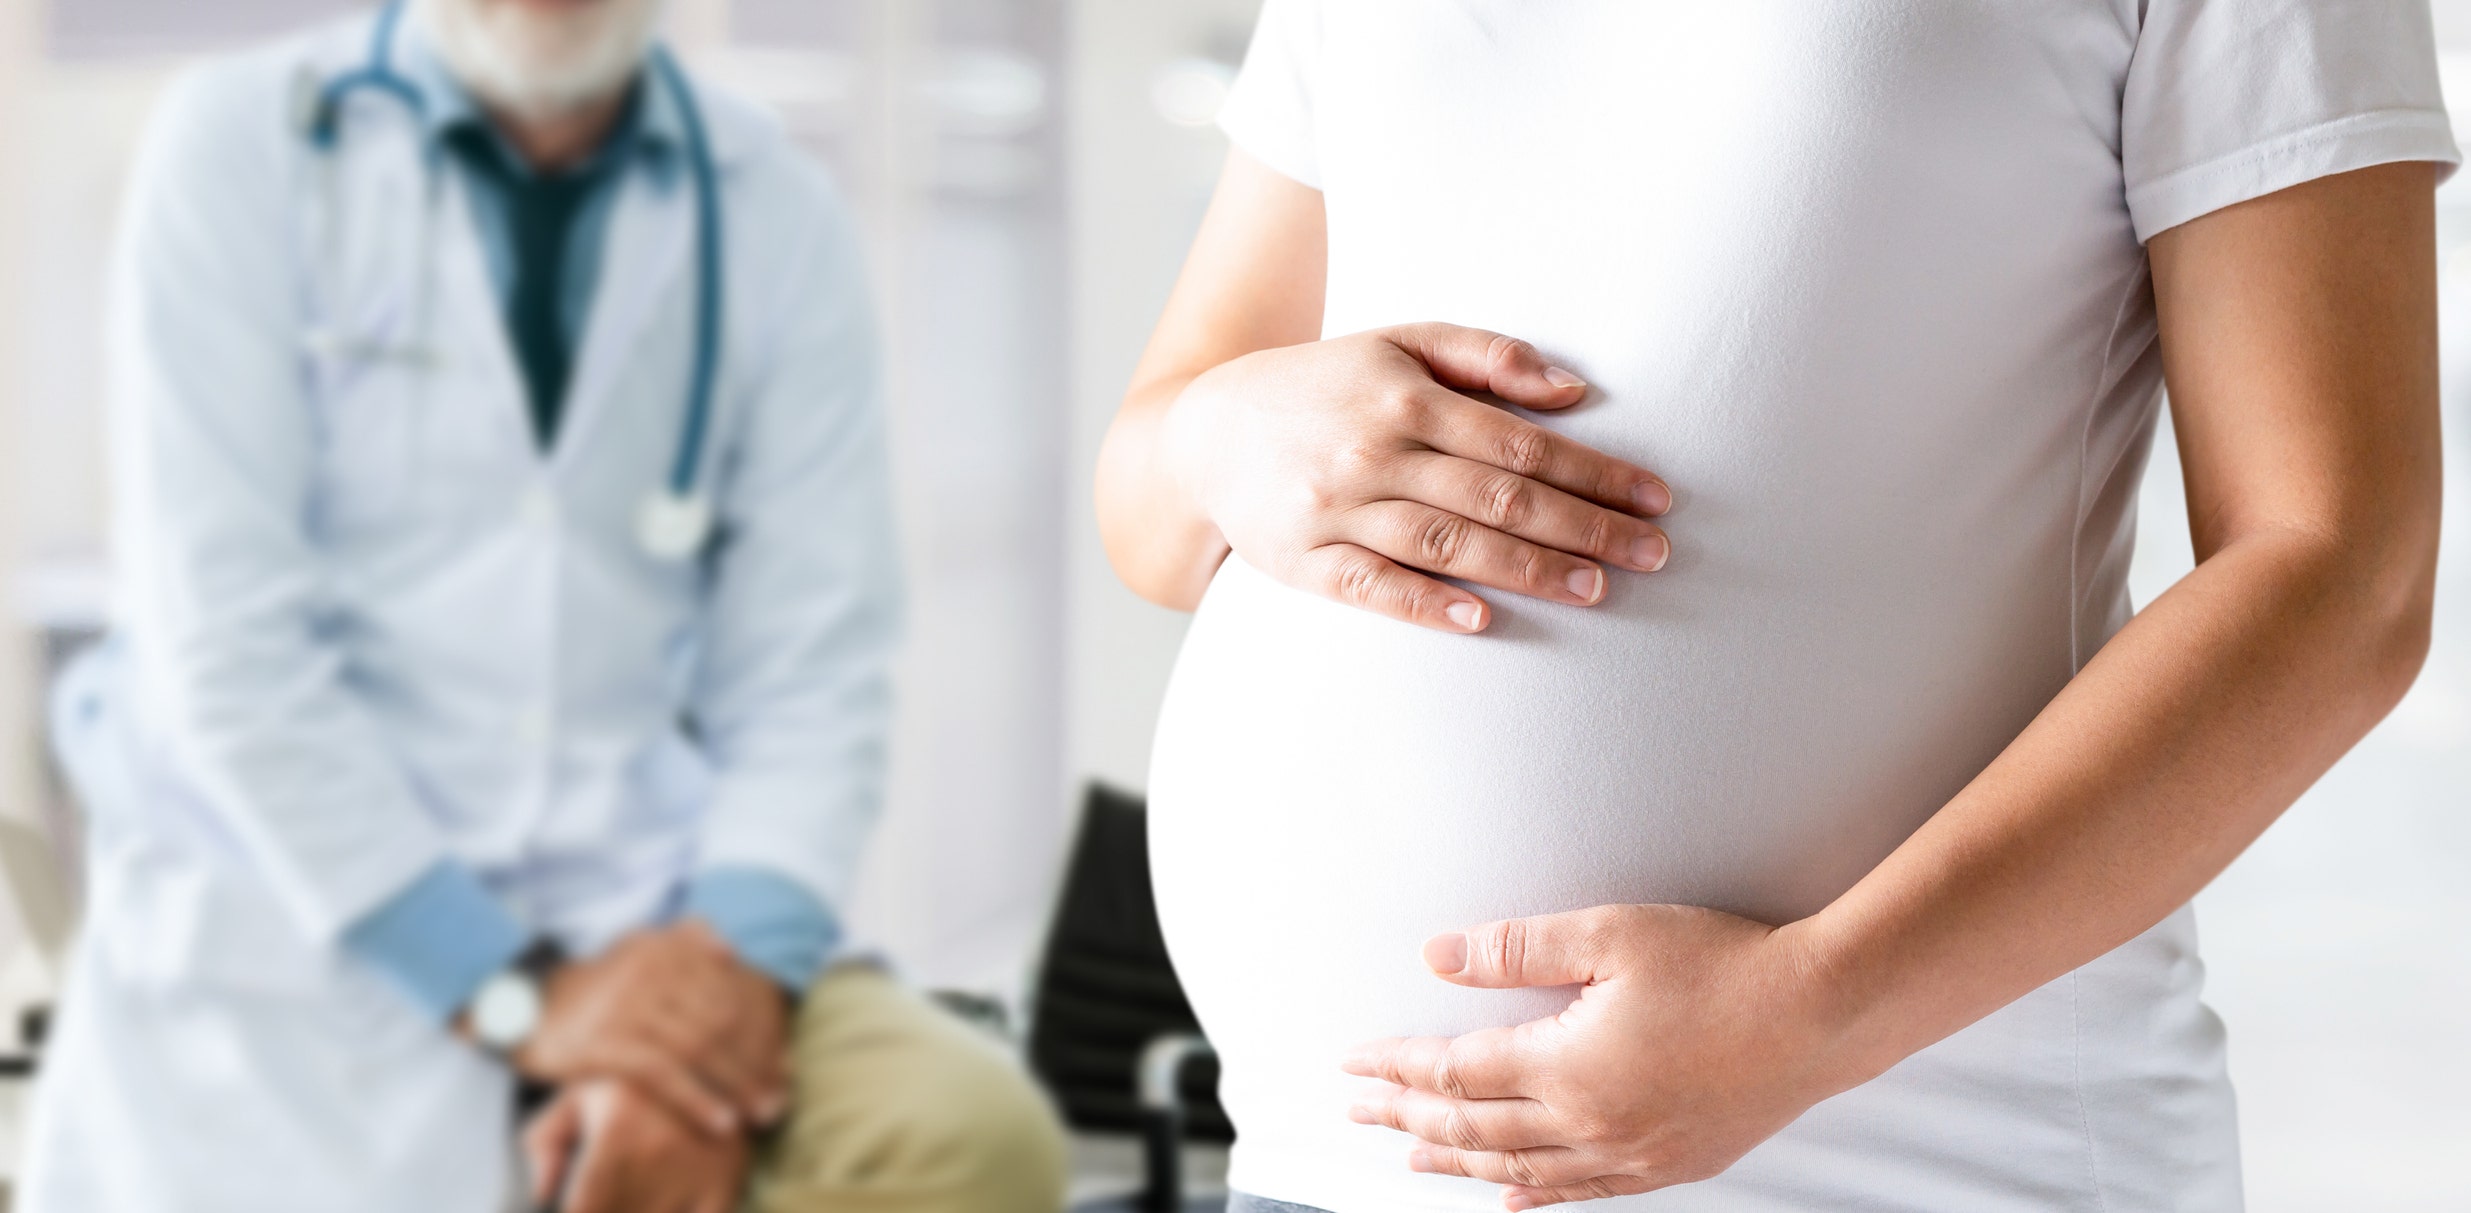 COVID-19 vaccines are safe and effective in pregnancy, new study shows